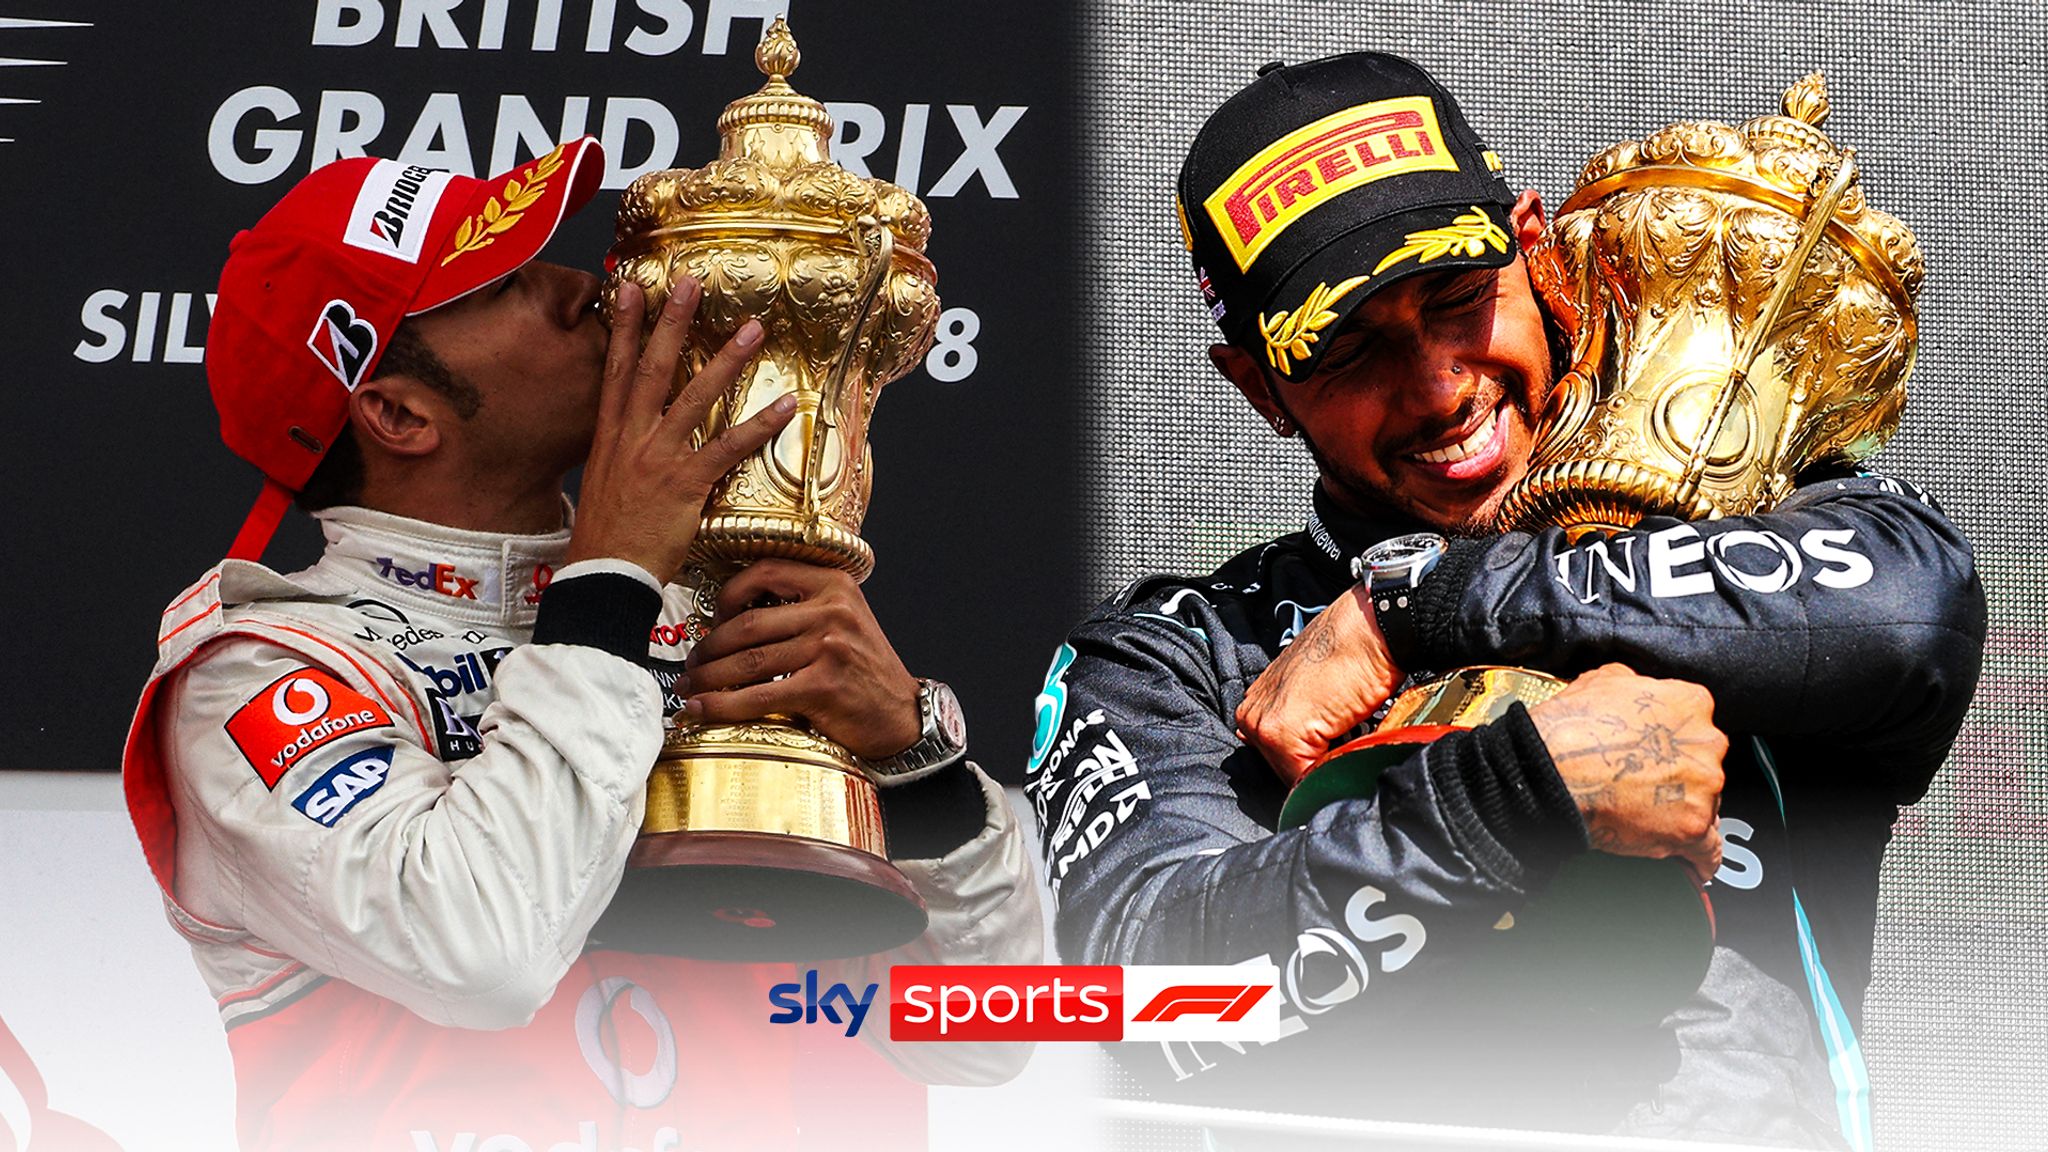 Lewis Hamilton says winning the British GP is 'the best thing ever' as he  recalls his eight F1 wins at Silverstone